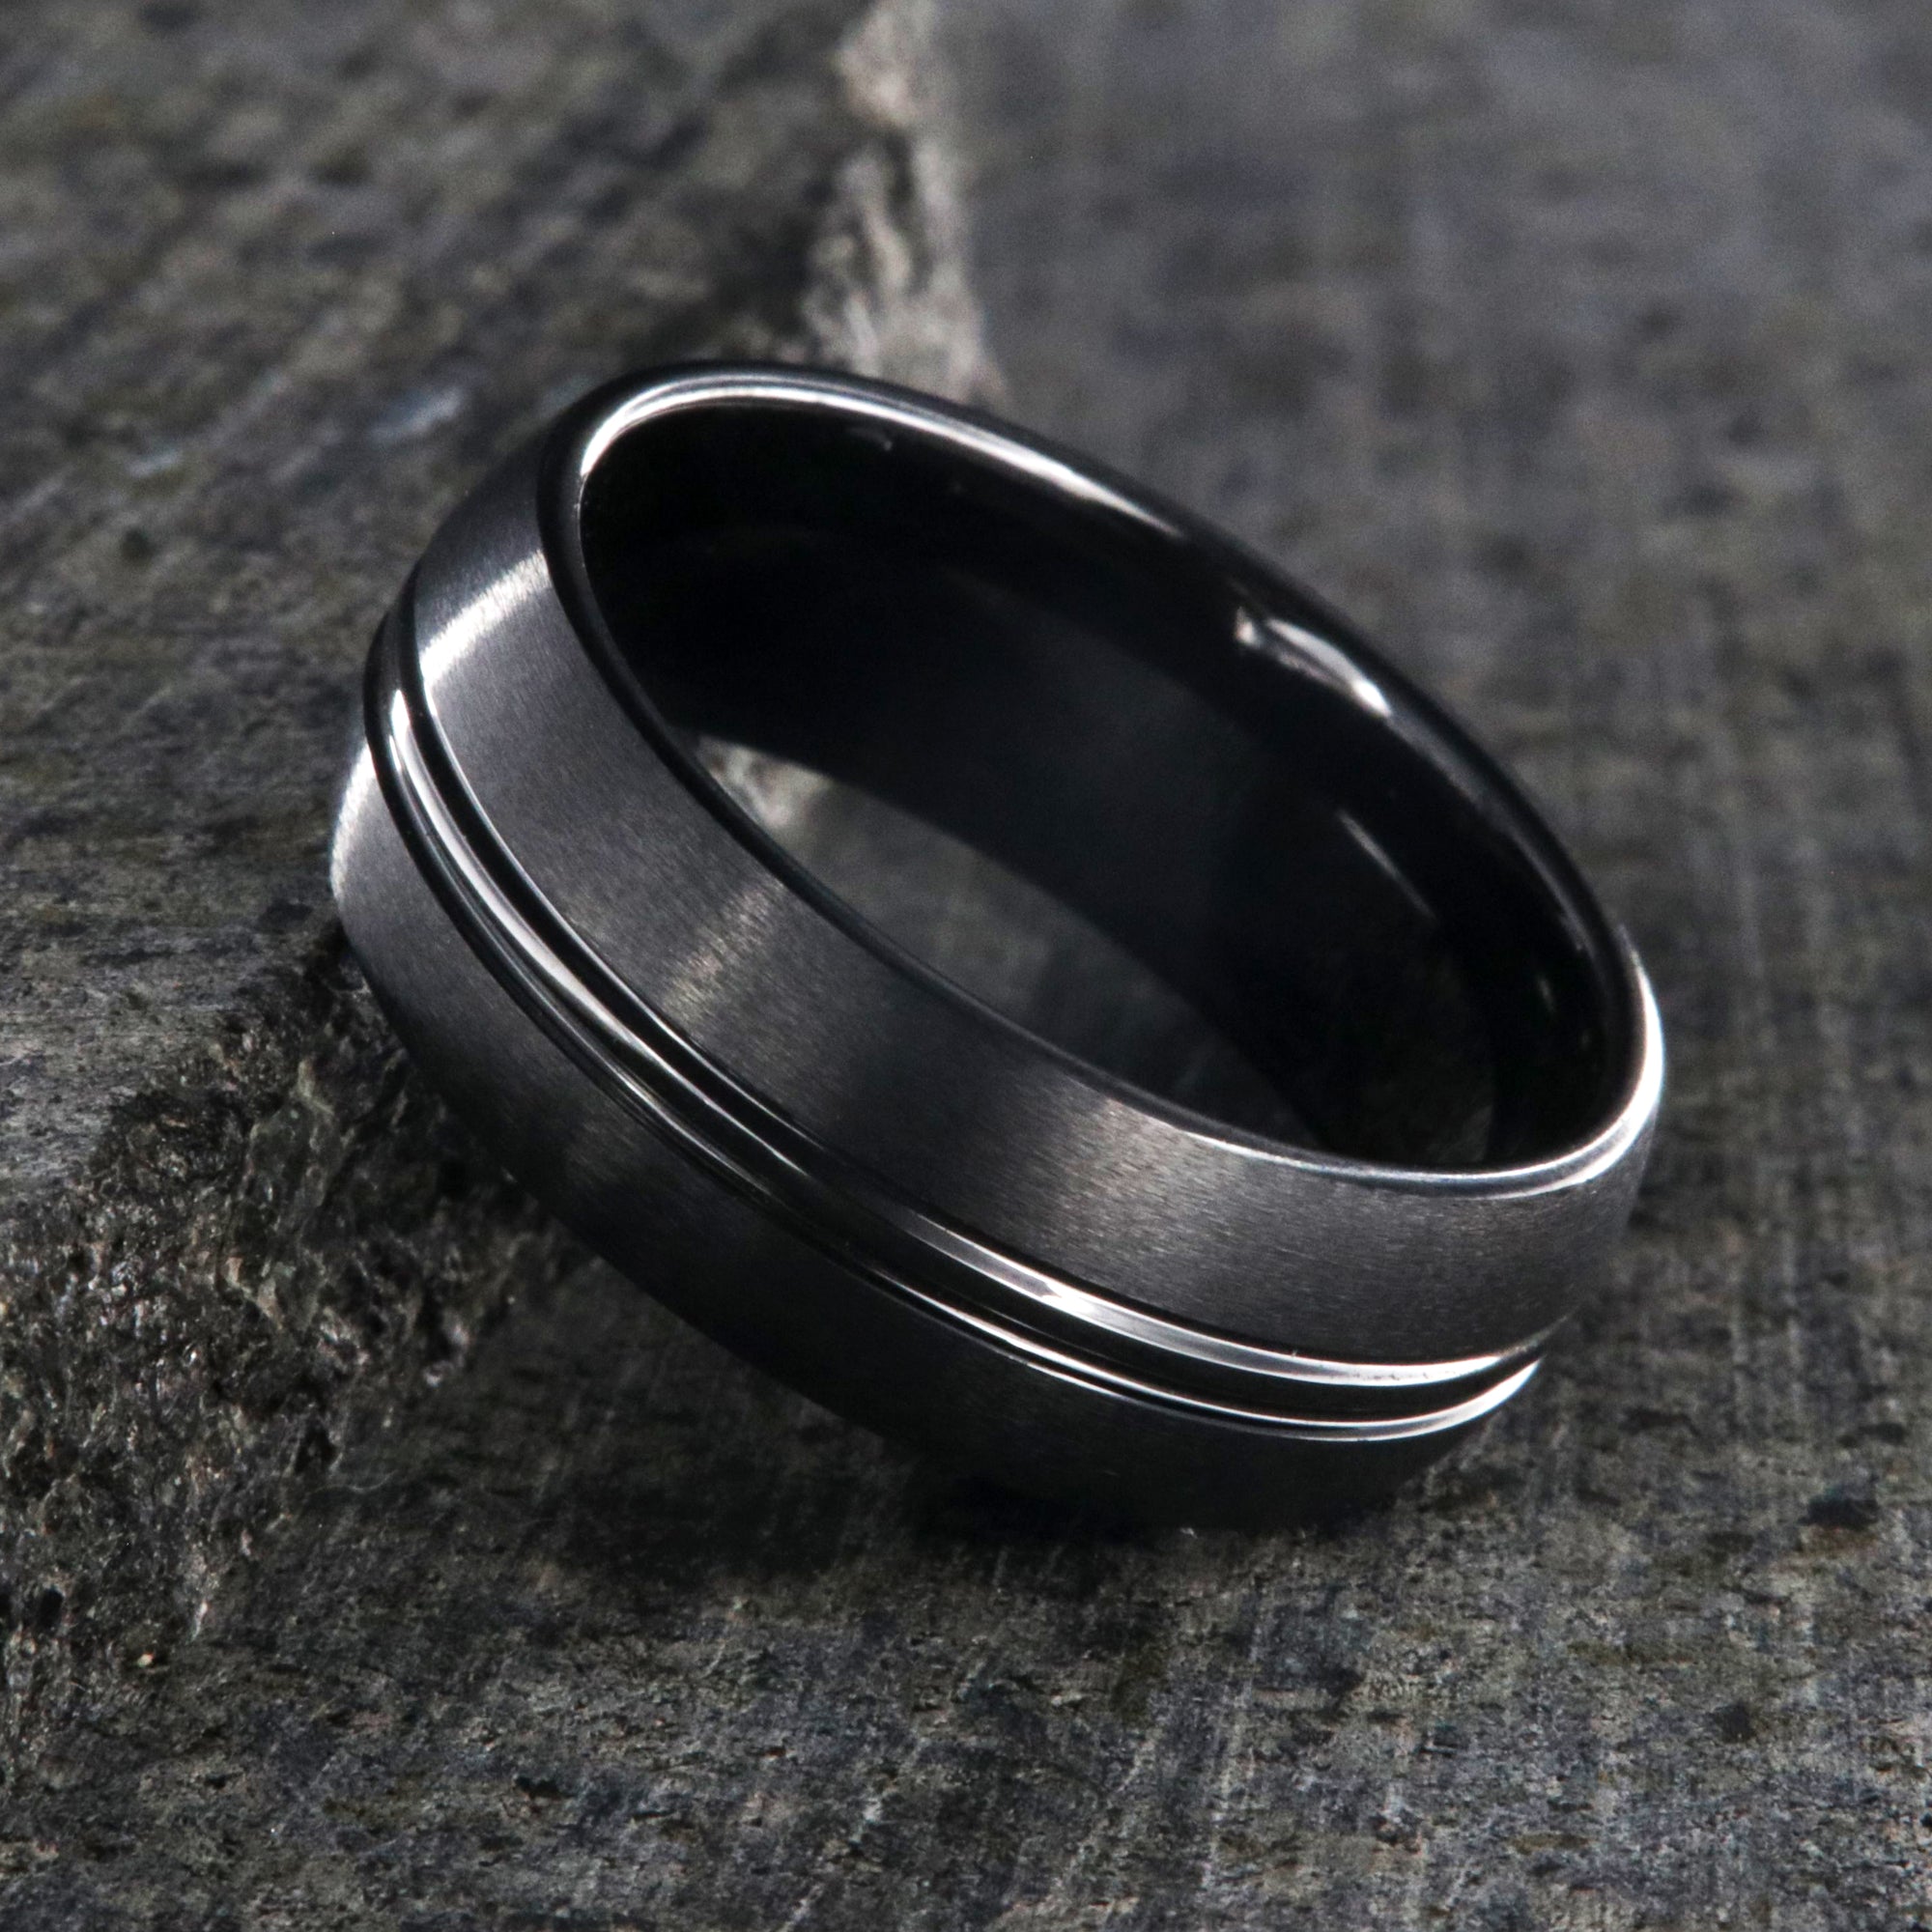 8mm wide black titanium wedding band with a center dual groove and rounded profile